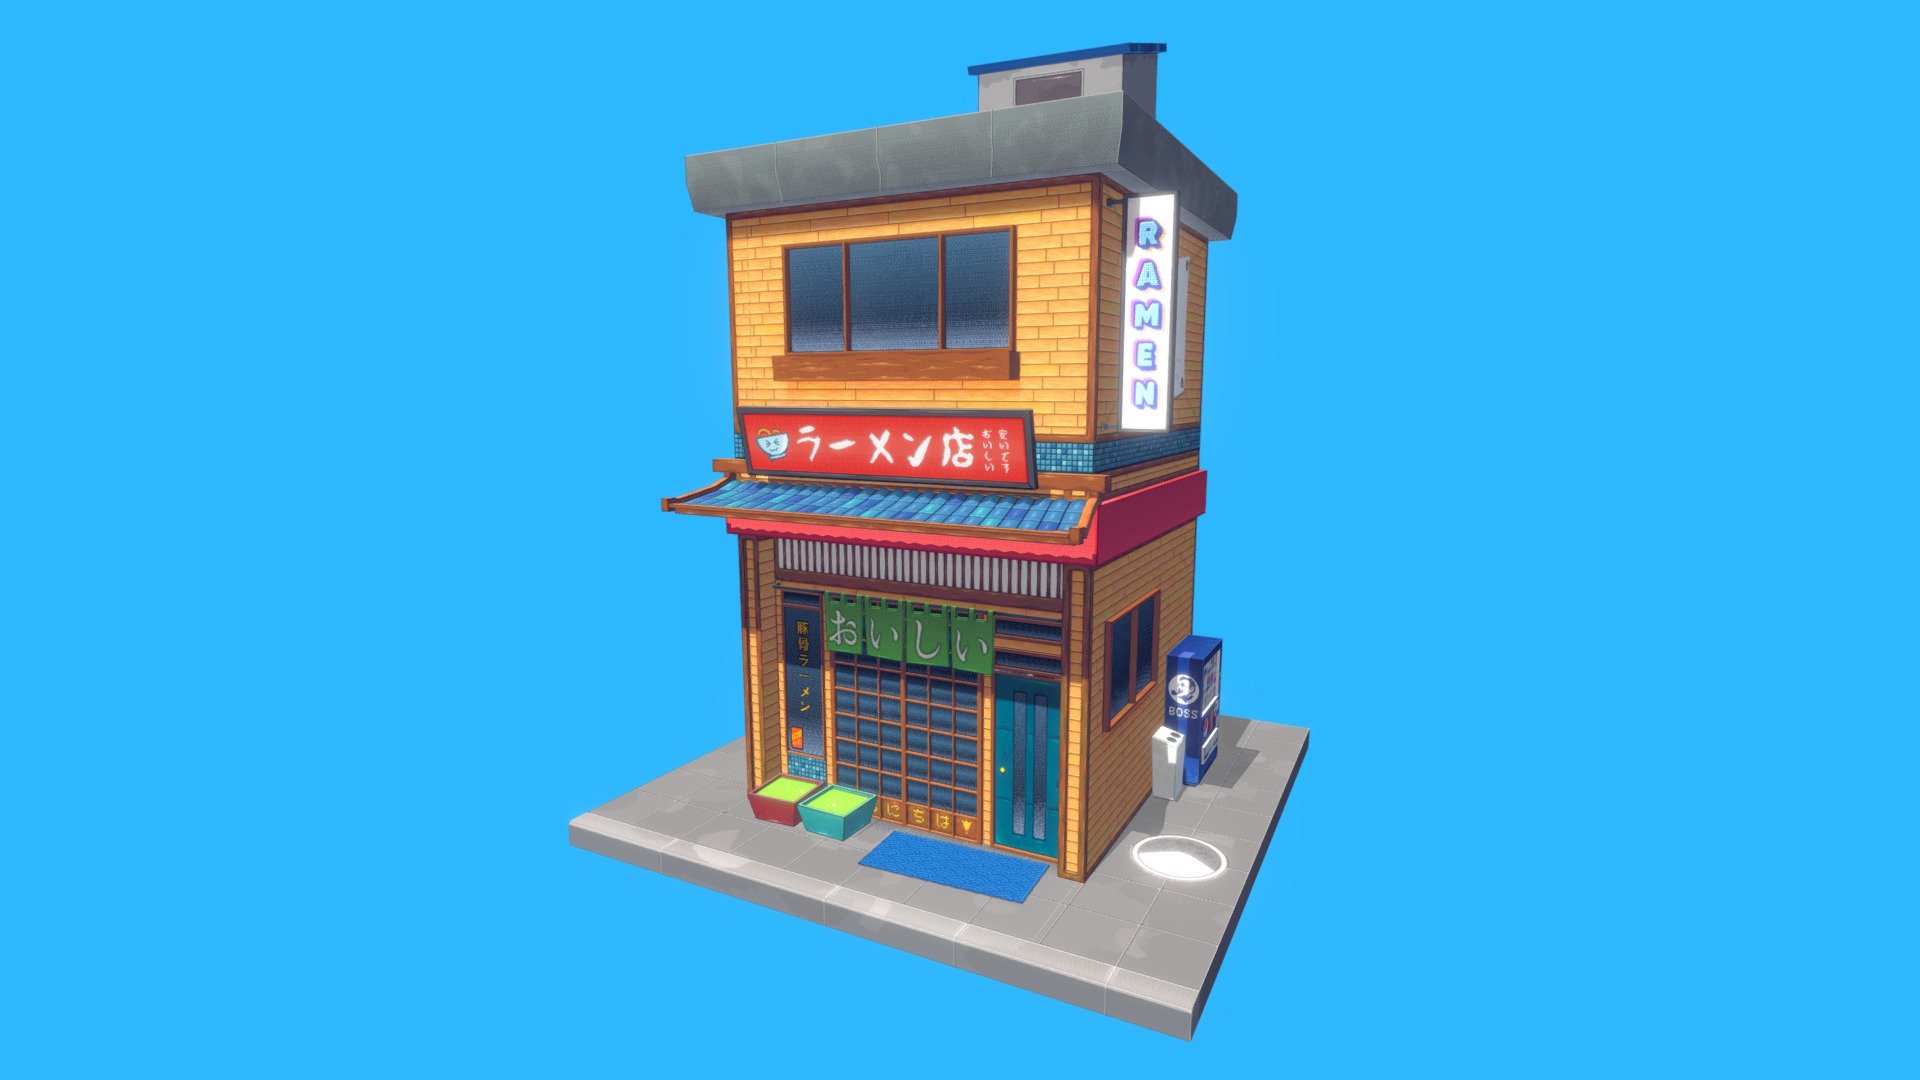 Stylized Ramen Shop with 16-bit / Pixel art texturing. Modeled in Blender 2.9, texture was hand painted in Aseprite and Photoshop. 1cm equals 1 pixel.

The workflow behind that took longer than expected, as the UVs had to be unwrapped manually for &lsquo;pixel perfect' alignment. 

Significant advantages over voxel tools are more pixel depth, game engine ready textures and UVs (for light maps in UE et cetera), curved geometry and placement in different angles 3d model